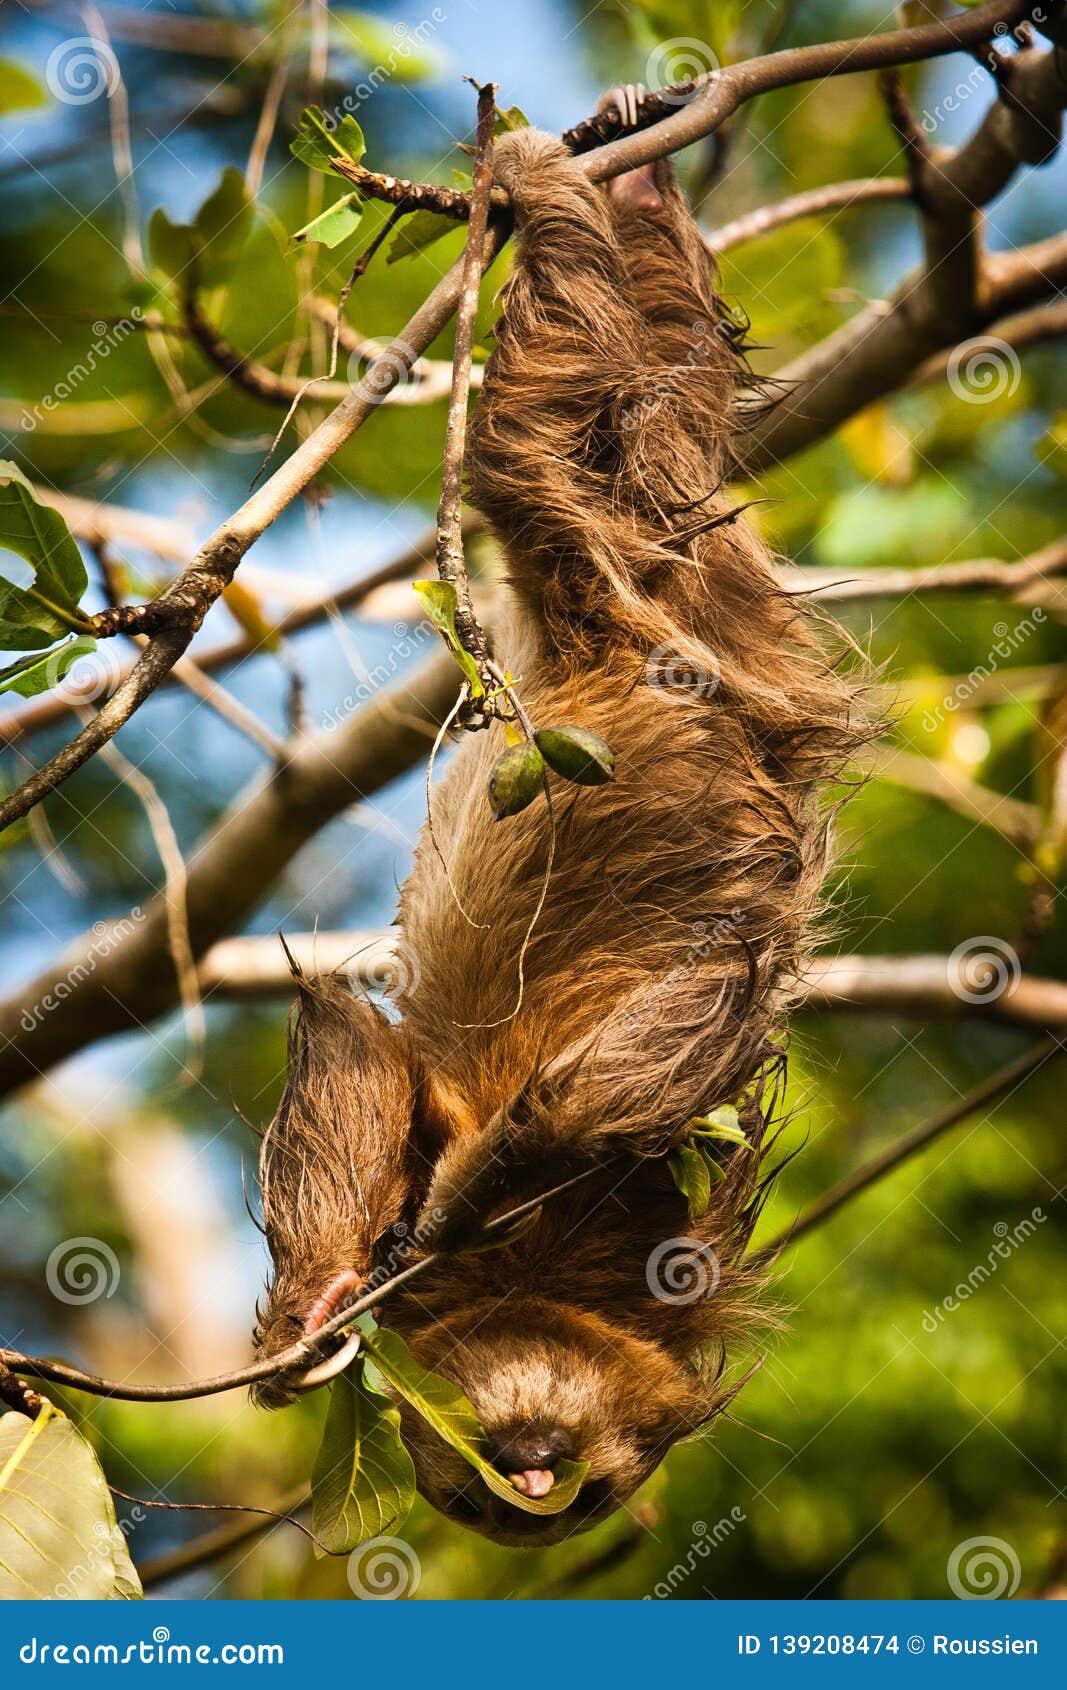 cute sloth lazy licking leaves on the tree in costarica